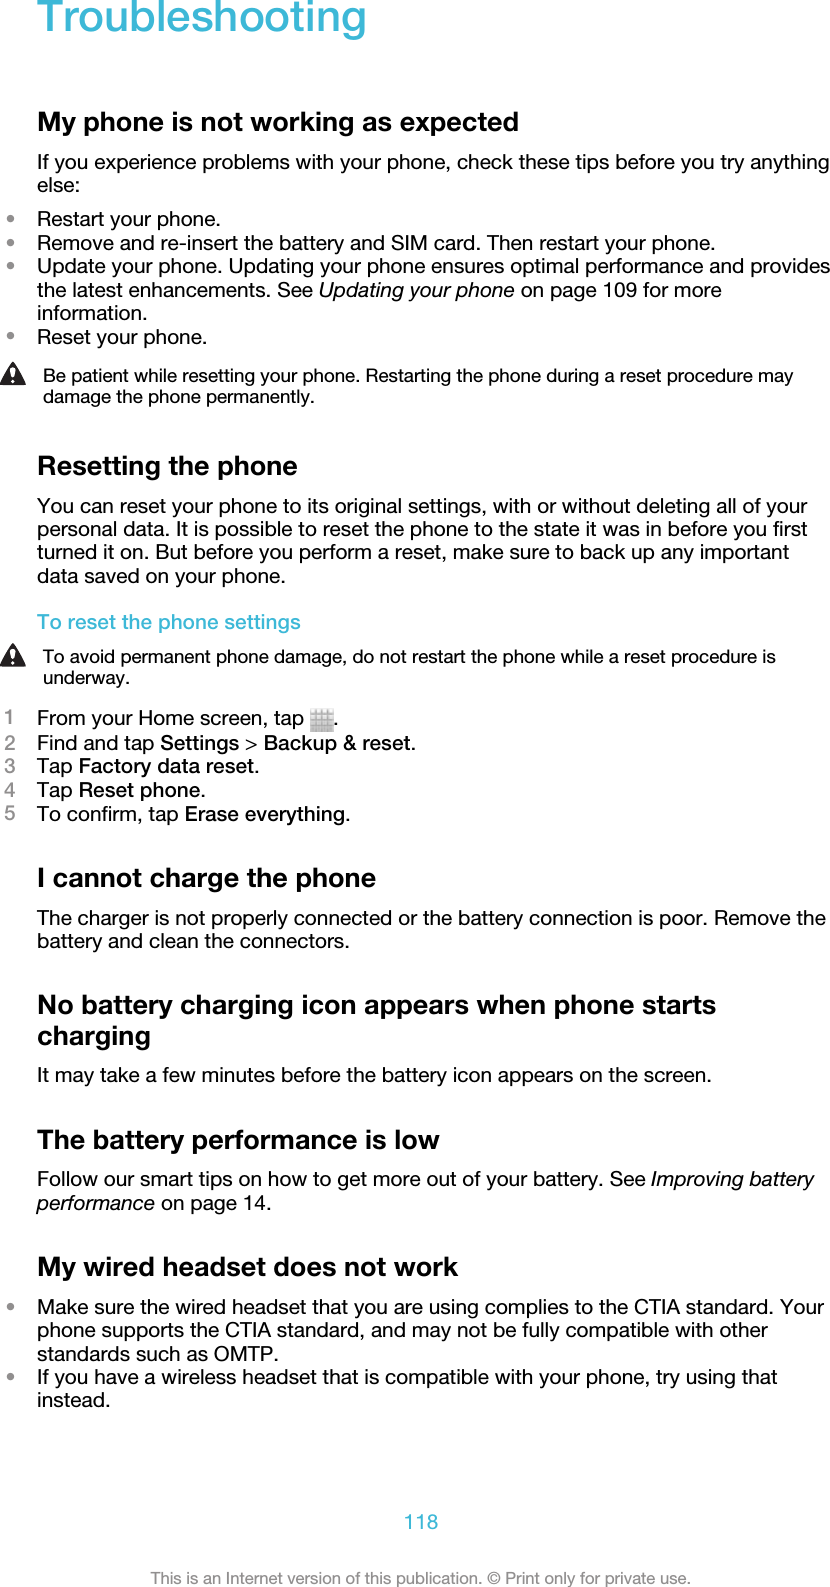 TroubleshootingMy phone is not working as expectedIf you experience problems with your phone, check these tips before you try anythingelse:•Restart your phone.•Remove and re-insert the battery and SIM card. Then restart your phone.•Update your phone. Updating your phone ensures optimal performance and providesthe latest enhancements. See Updating your phone on page 109 for moreinformation.•Reset your phone.Be patient while resetting your phone. Restarting the phone during a reset procedure maydamage the phone permanently.Resetting the phoneYou can reset your phone to its original settings, with or without deleting all of yourpersonal data. It is possible to reset the phone to the state it was in before you firstturned it on. But before you perform a reset, make sure to back up any importantdata saved on your phone.To reset the phone settingsTo avoid permanent phone damage, do not restart the phone while a reset procedure isunderway.1From your Home screen, tap  .2Find and tap Settings &gt; Backup &amp; reset.3Tap Factory data reset.4Tap Reset phone.5To confirm, tap Erase everything.I cannot charge the phoneThe charger is not properly connected or the battery connection is poor. Remove thebattery and clean the connectors.No battery charging icon appears when phone startschargingIt may take a few minutes before the battery icon appears on the screen.The battery performance is lowFollow our smart tips on how to get more out of your battery. See Improving batteryperformance on page 14.My wired headset does not work•Make sure the wired headset that you are using complies to the CTIA standard. Yourphone supports the CTIA standard, and may not be fully compatible with otherstandards such as OMTP.•If you have a wireless headset that is compatible with your phone, try using thatinstead.118This is an Internet version of this publication. © Print only for private use.